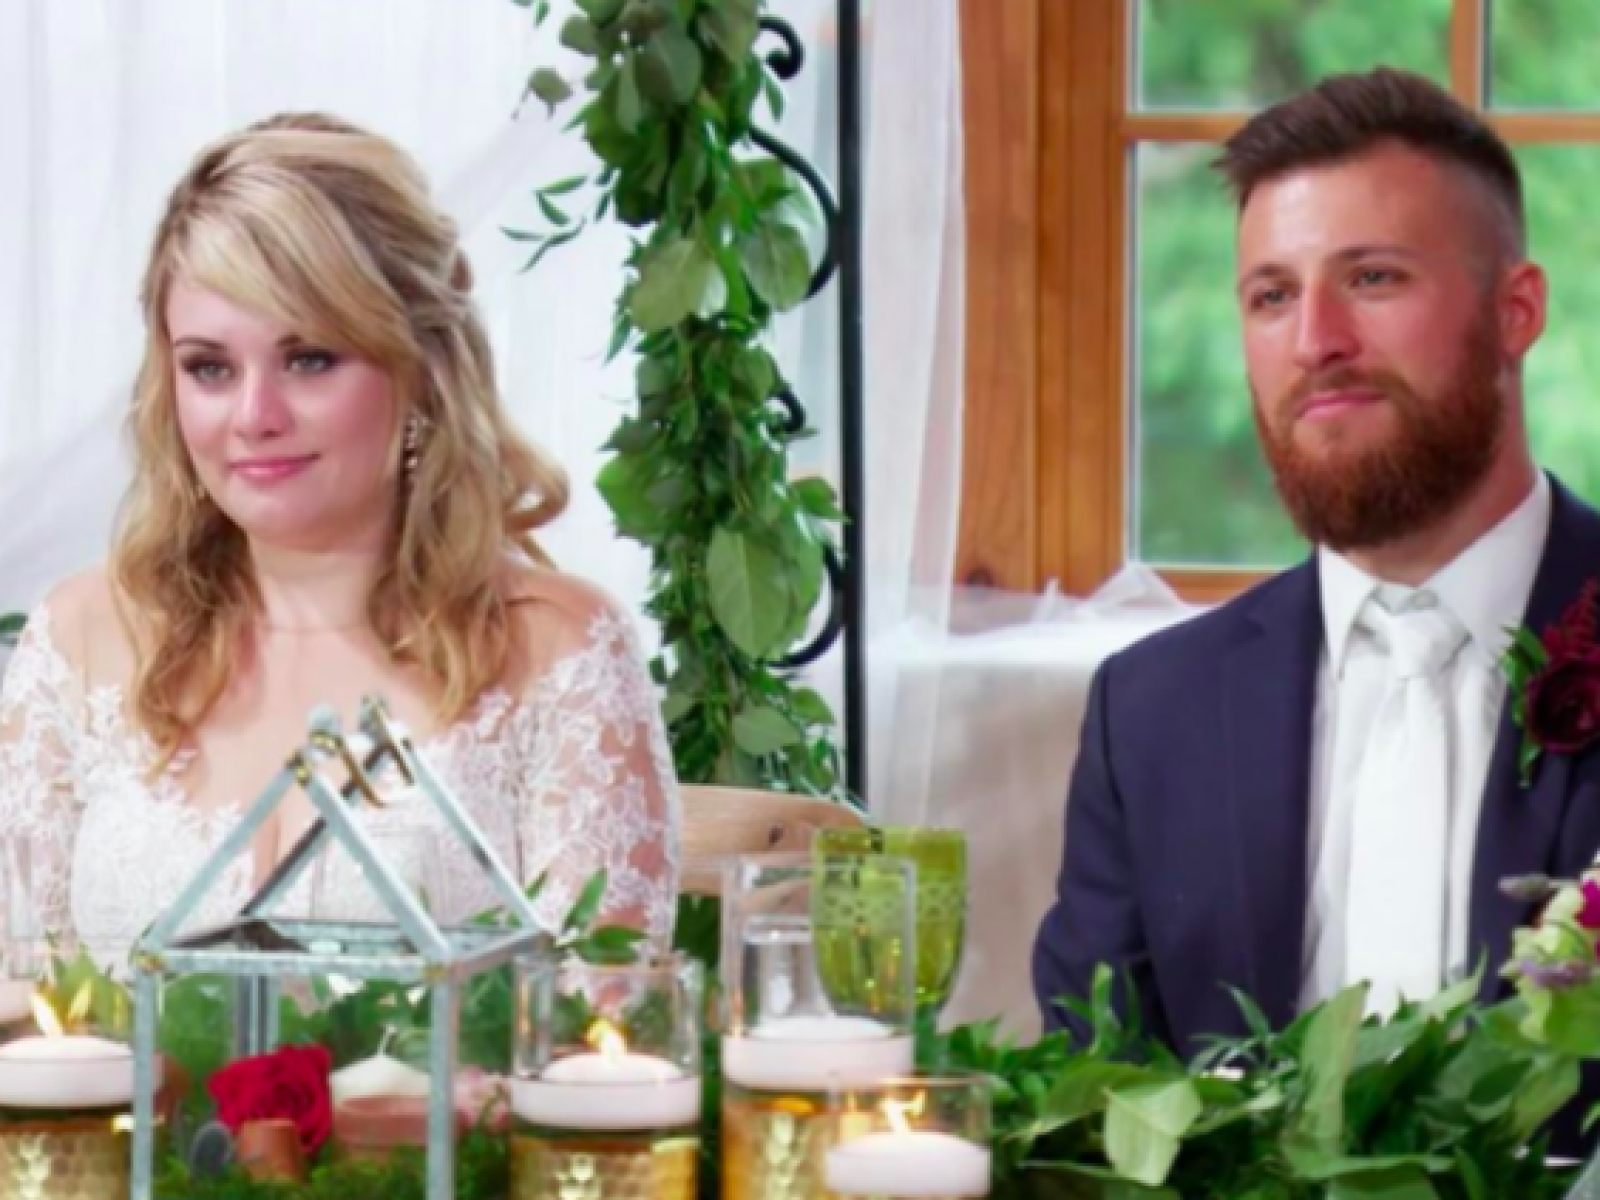 Avenue Kollegium Vidunderlig Is 'Married At First Sight' Couple Kate and Luke Still Together? Spoilers